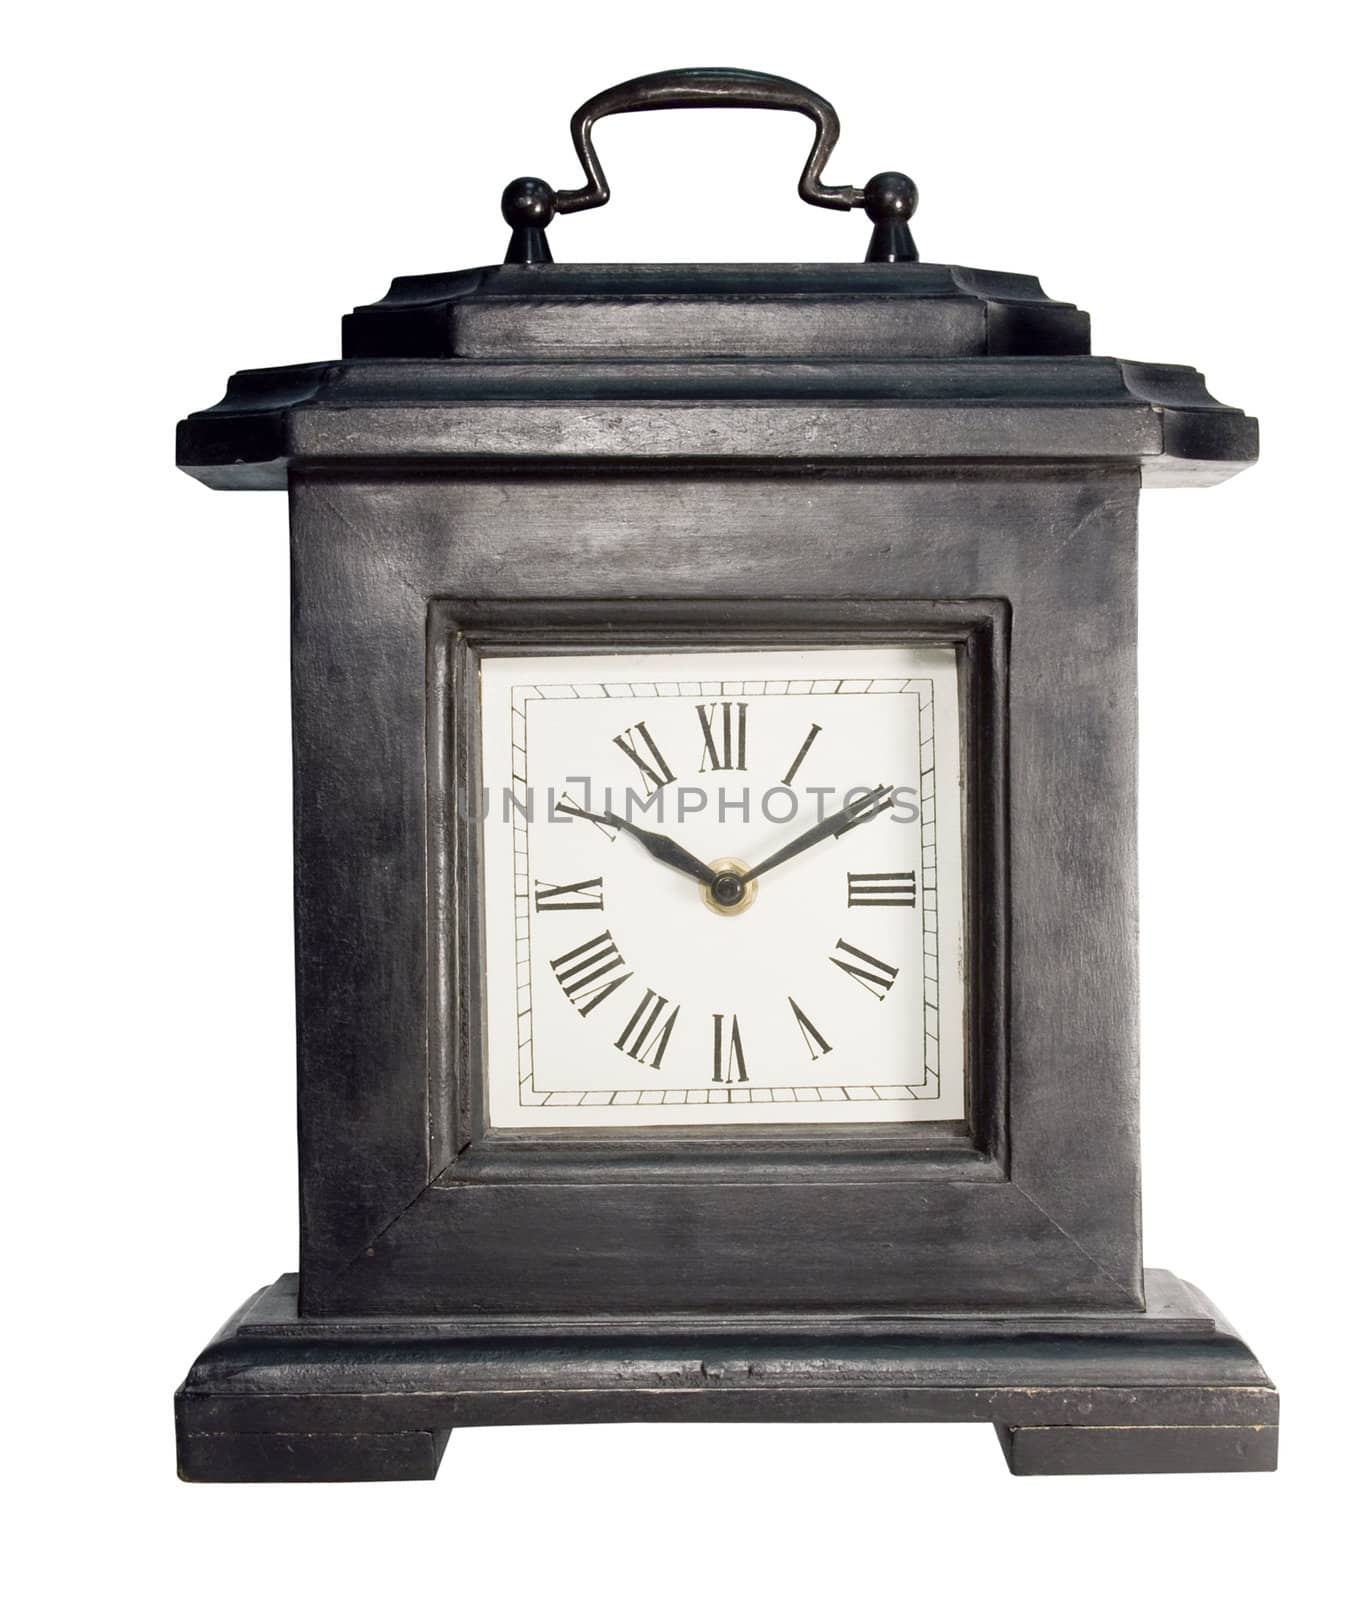 black wooden vintage mantle clock isolated over white with clipping path at original size